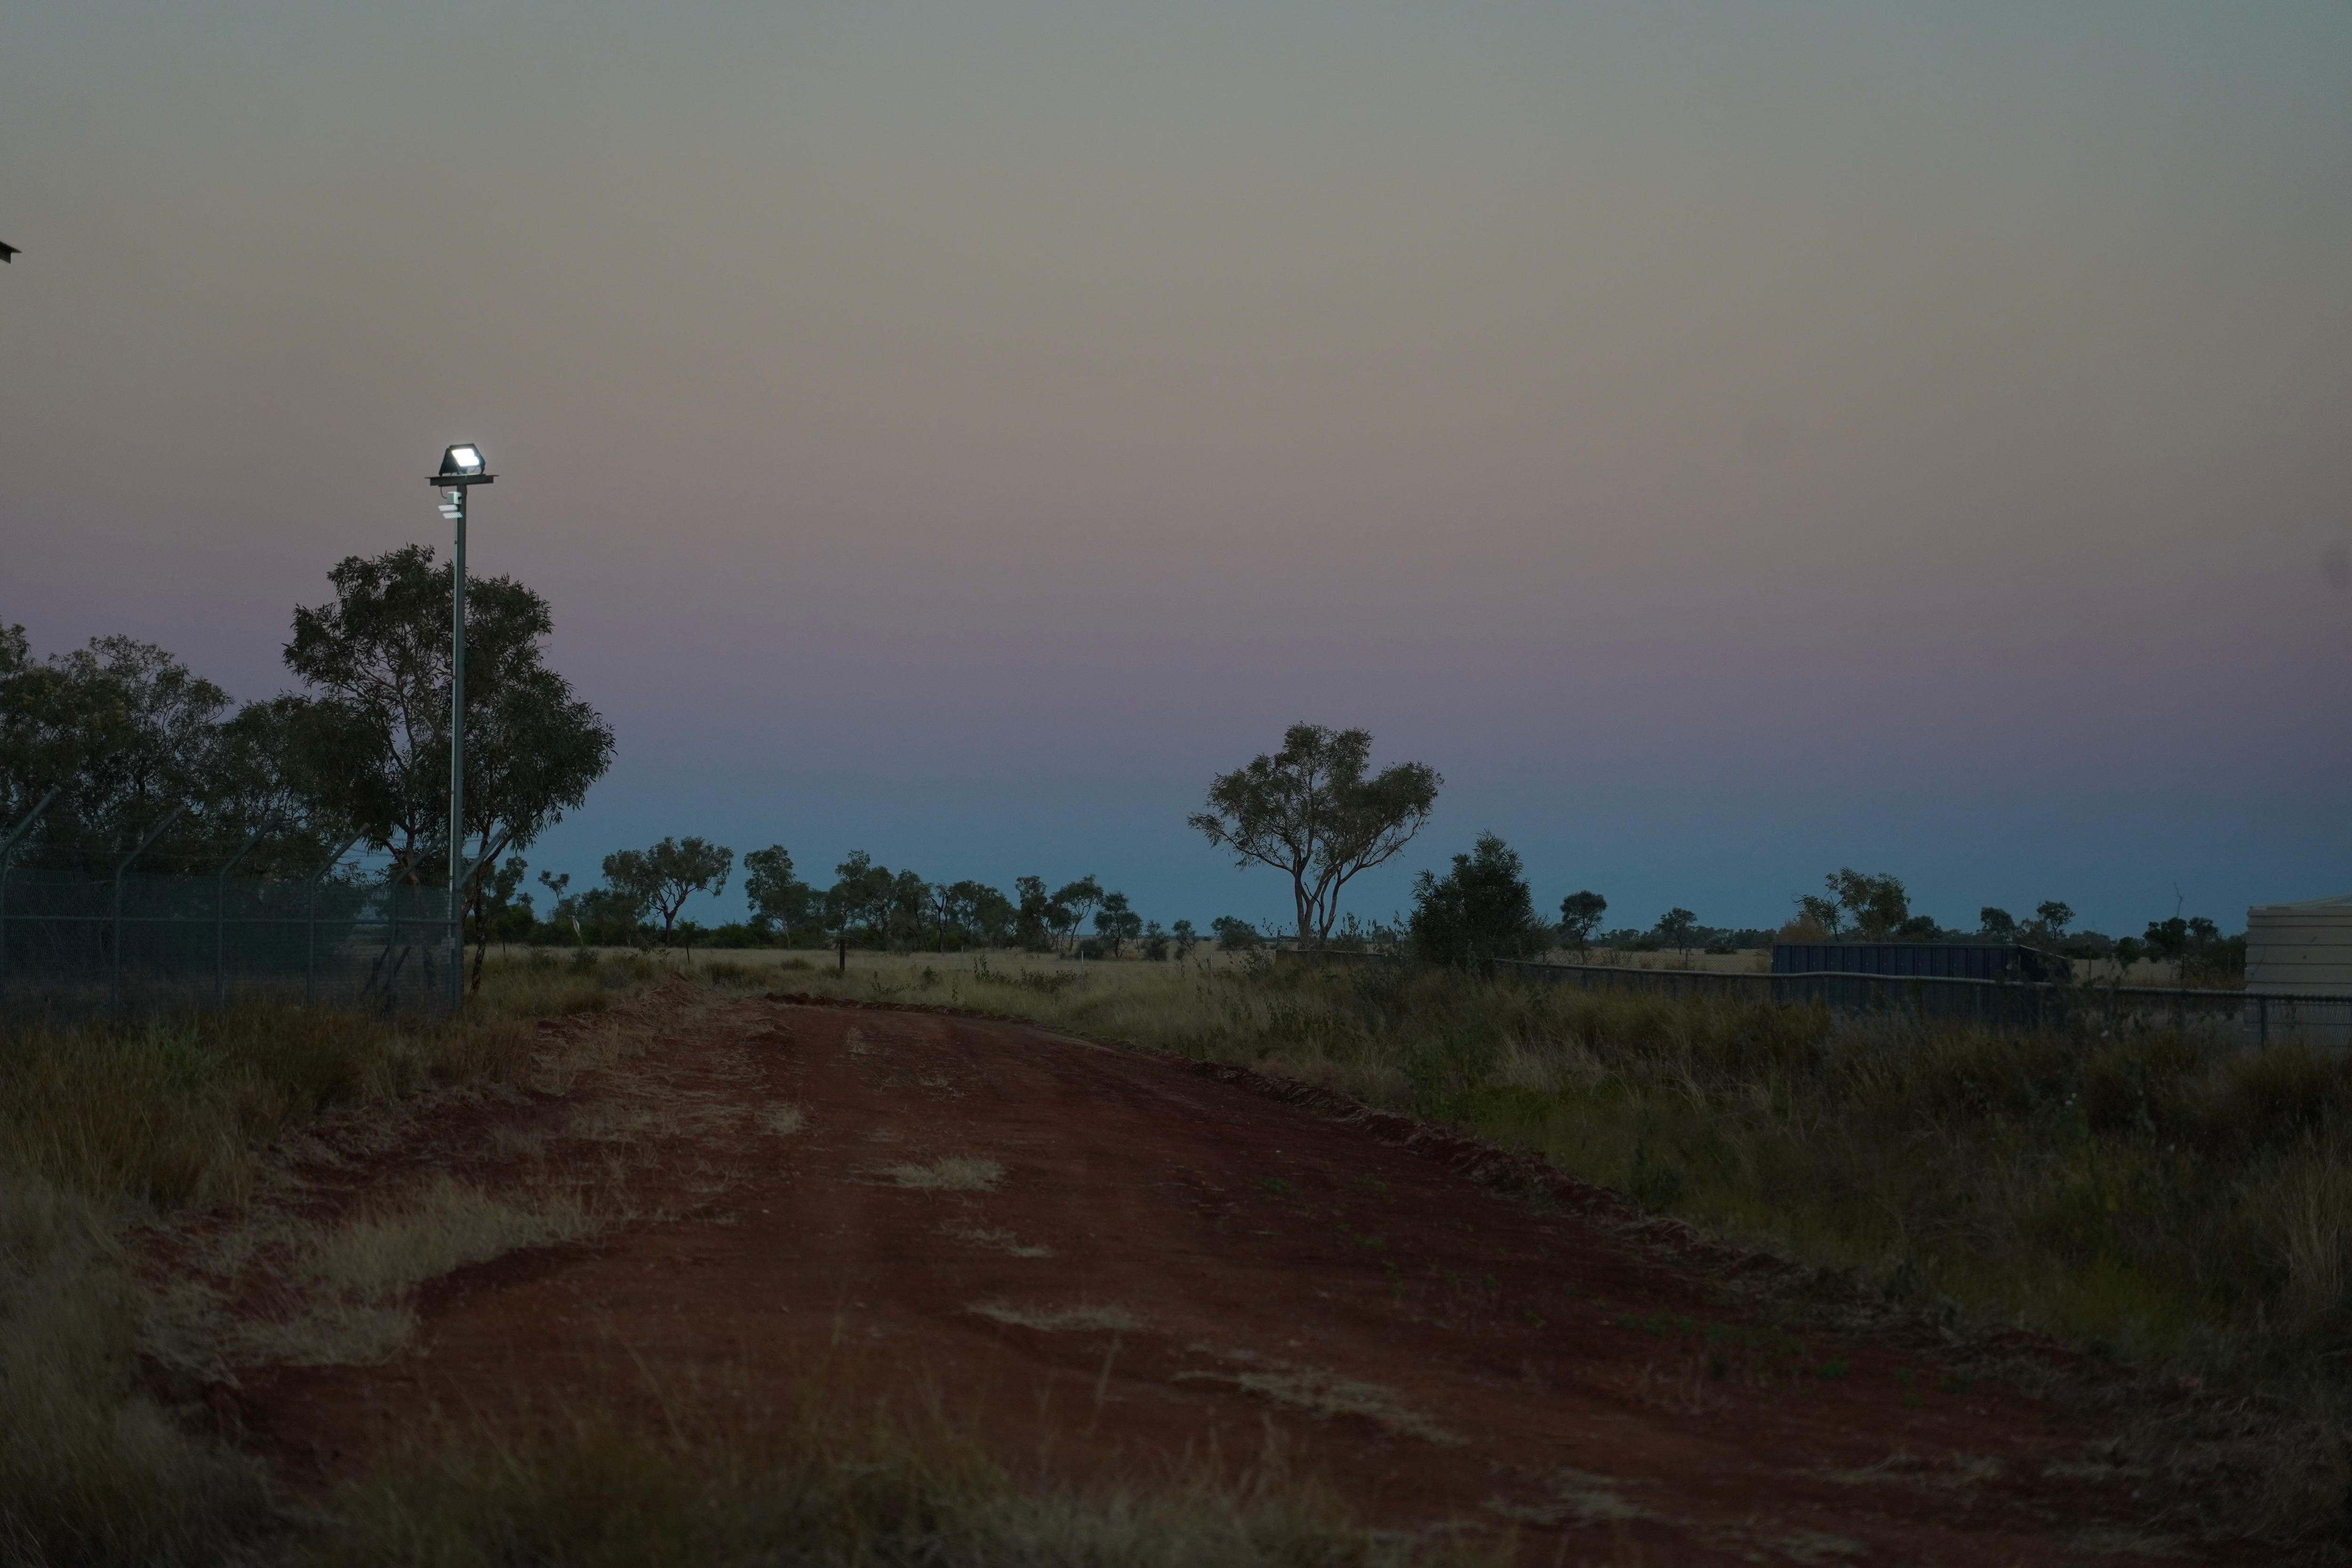 Sunset with blues, pinks and purples over red dirt road